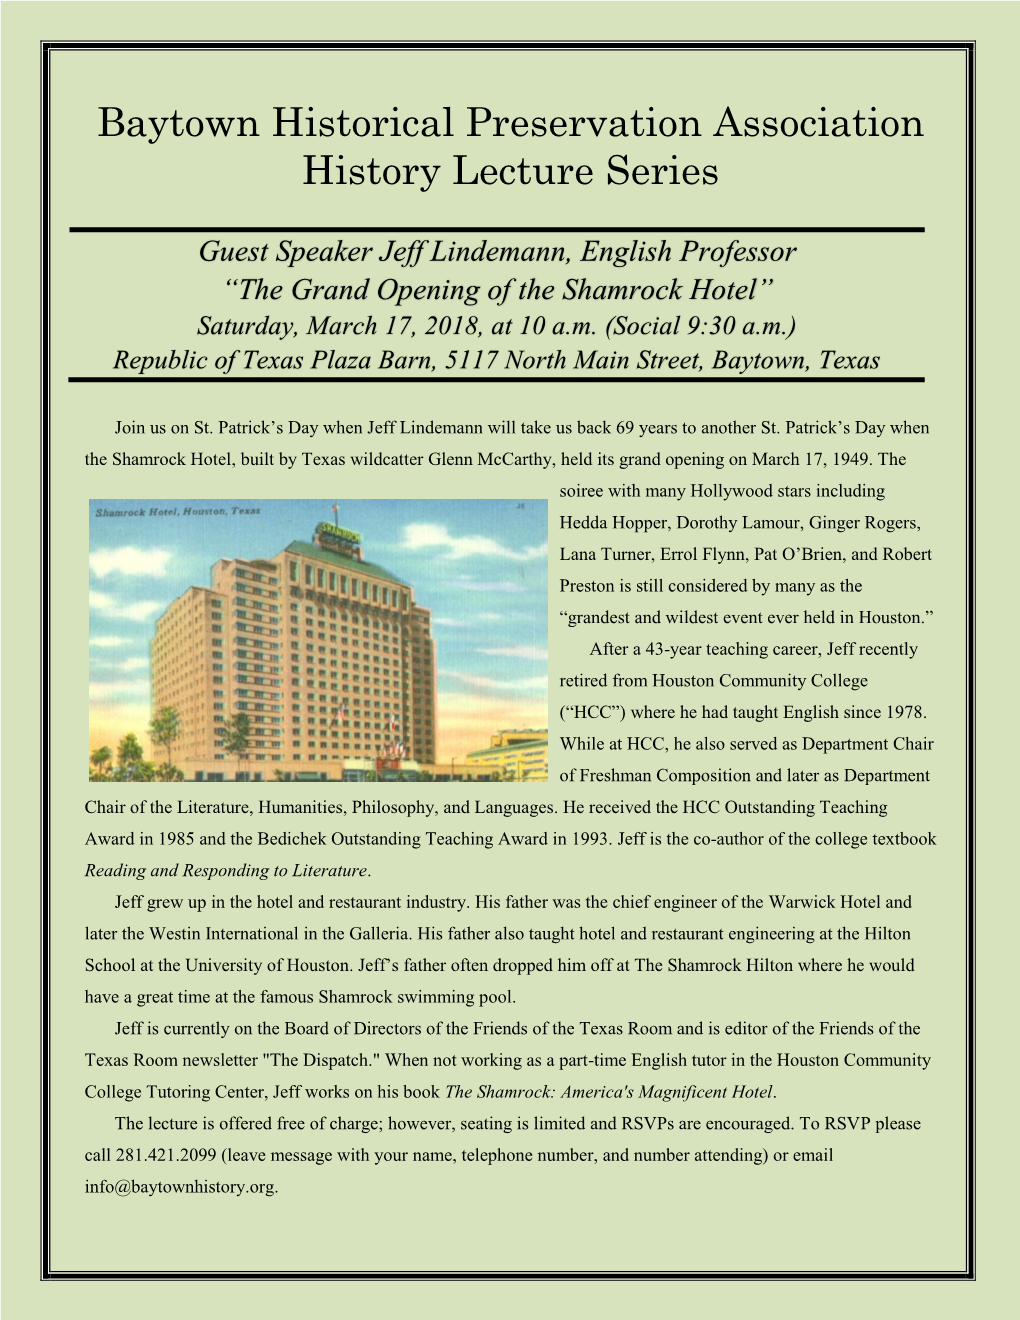 Baytown Historical Preservation Association History Lecture Series